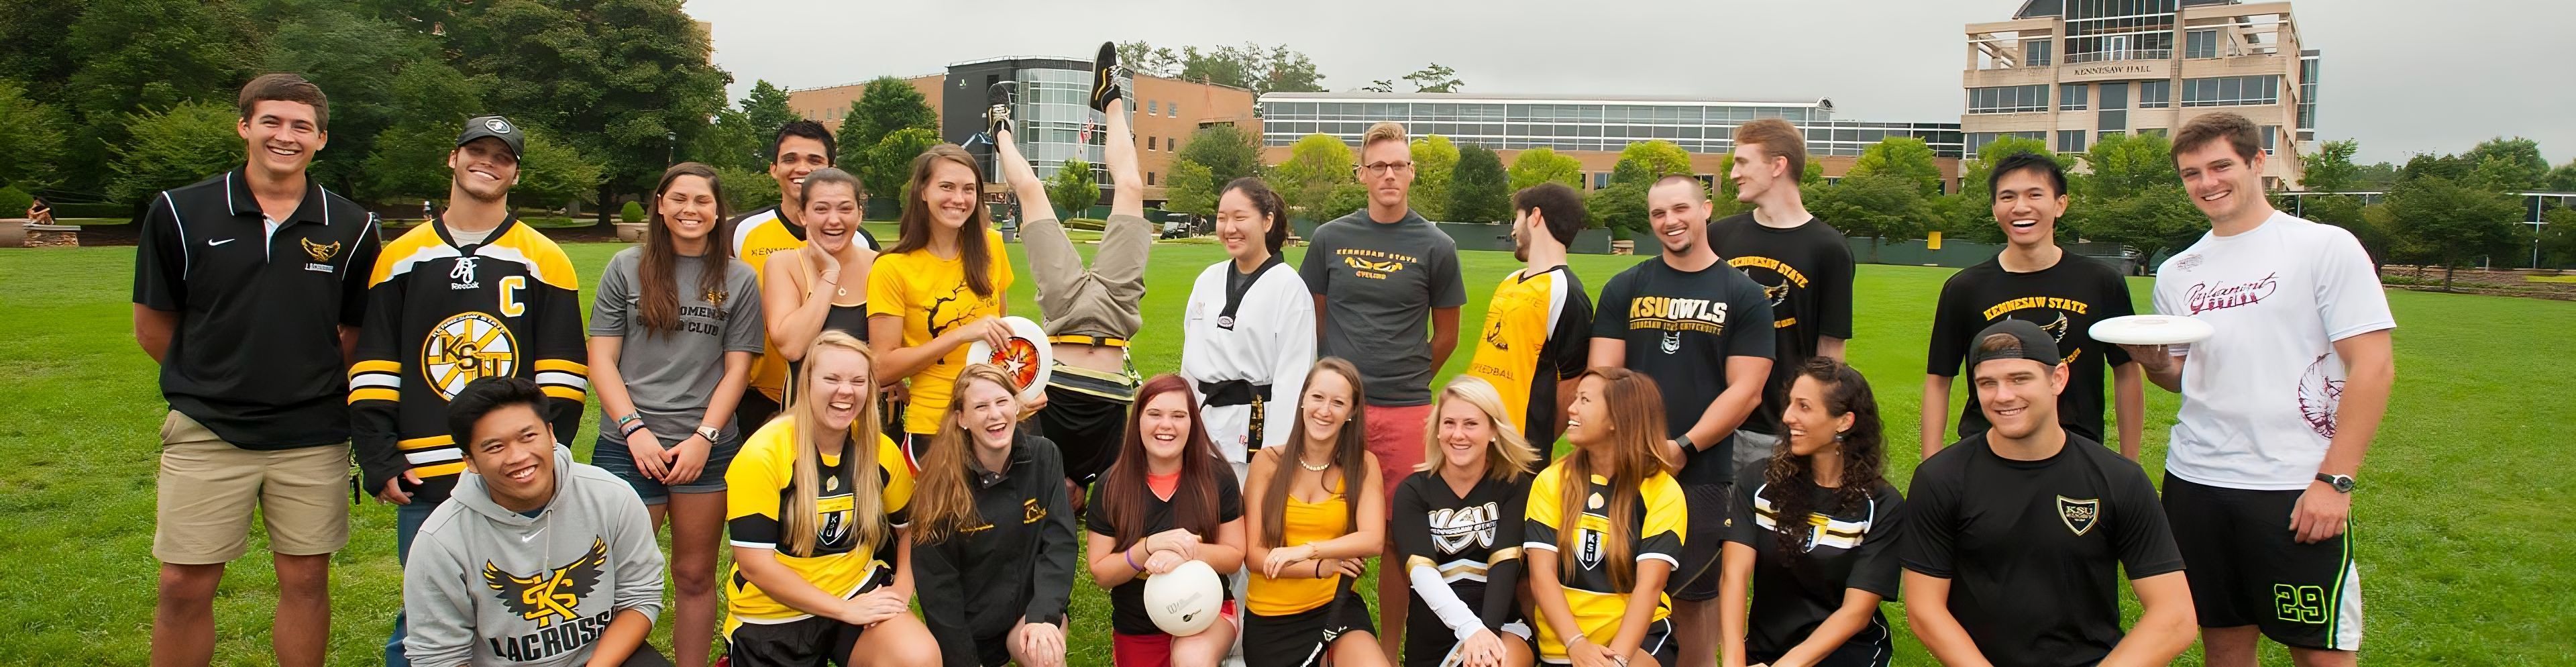 group of ksu students posing together in sports gear